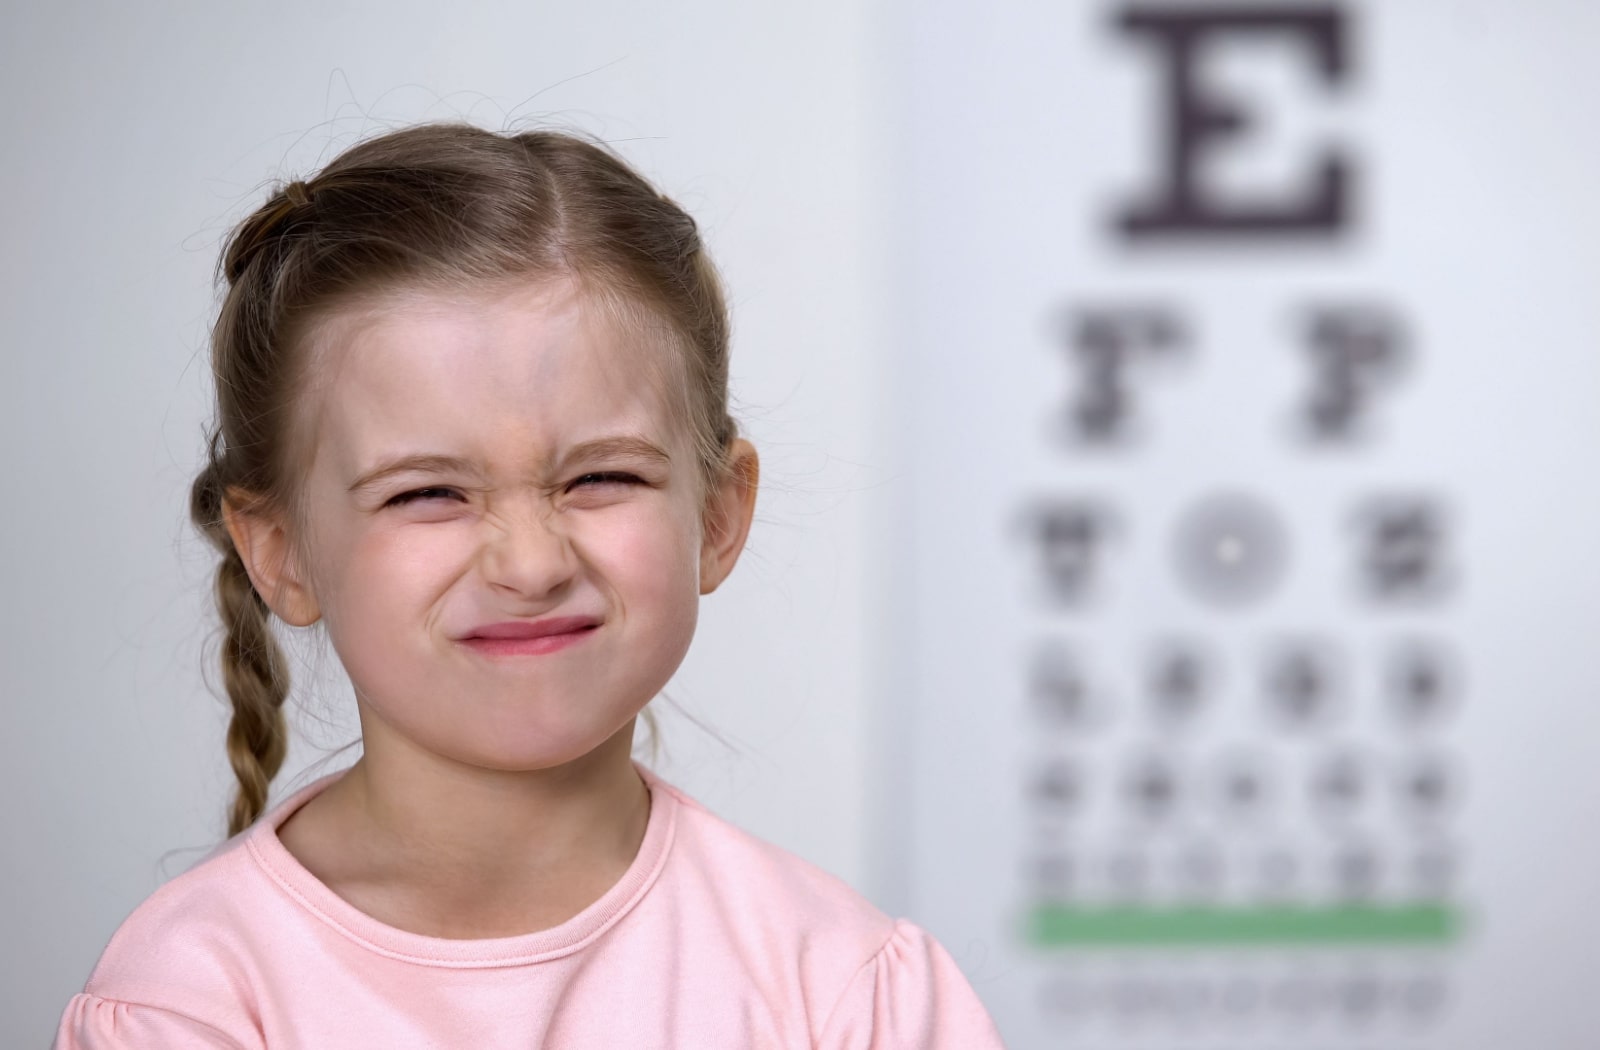 A young girl standing in front of a Snellen eye chart that's out of focus, and the girl is squinting. Squinting may be a sign that your child has developed myopia.